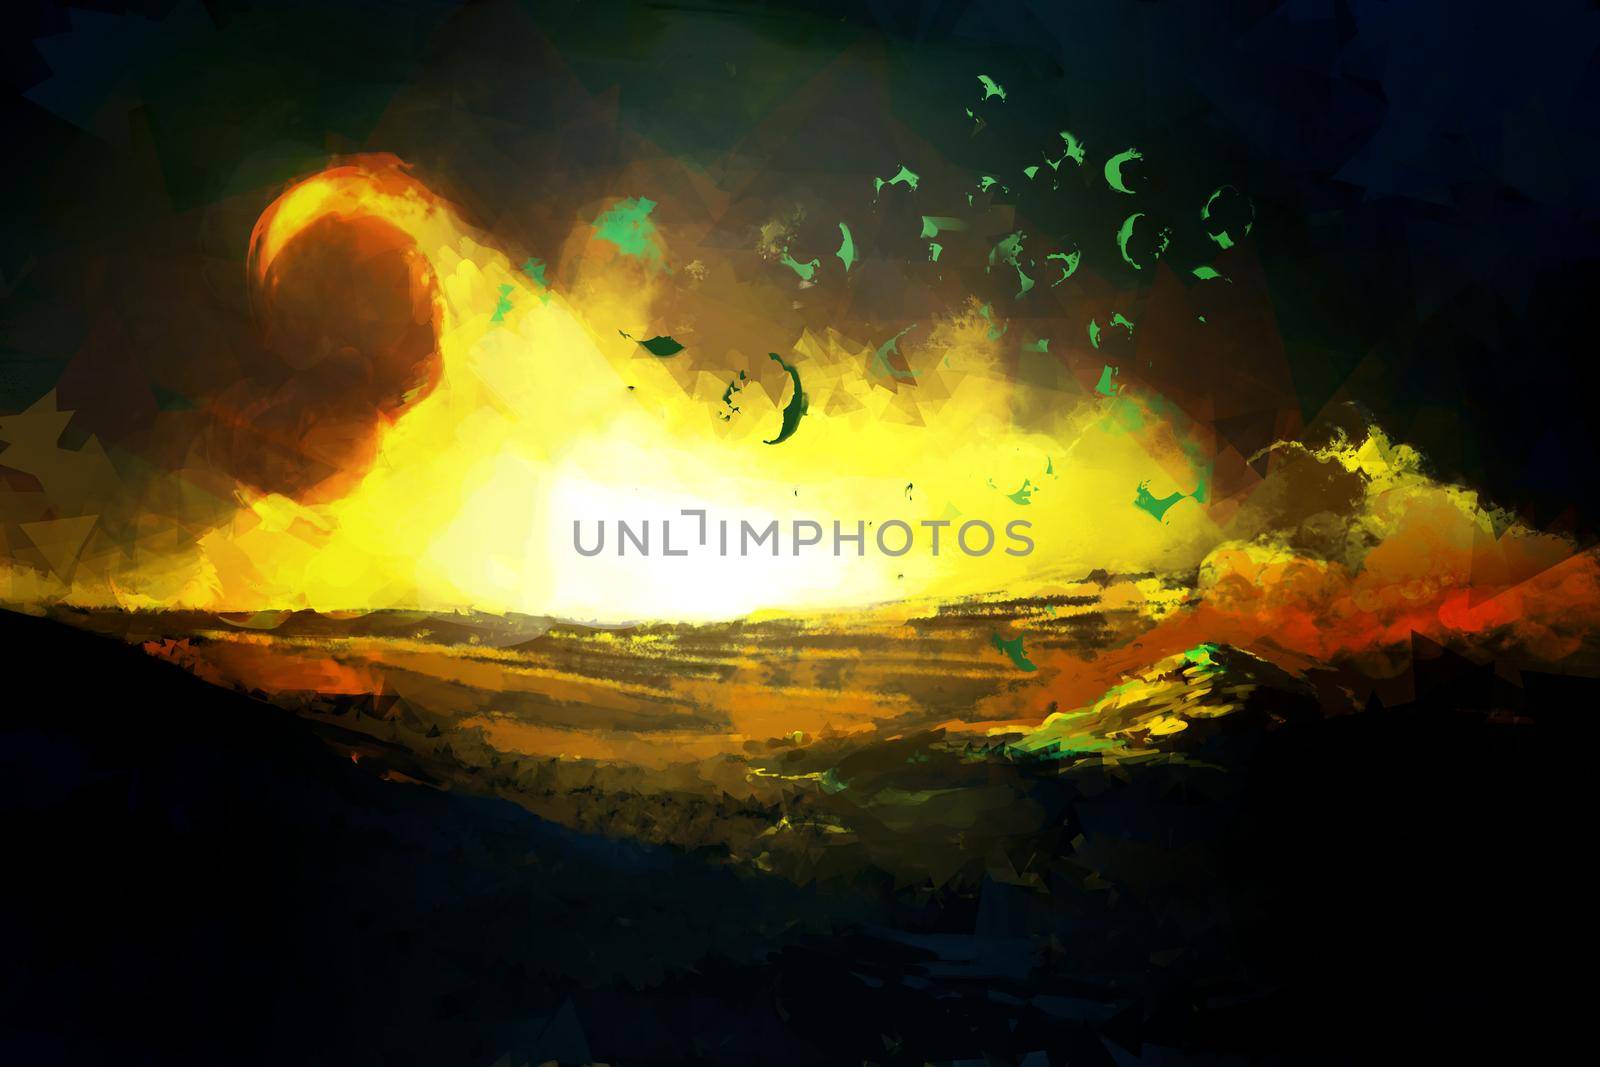 Scenic Nature Illustration with Fire Flame in Dark Night. Image of Destruction Disaster.